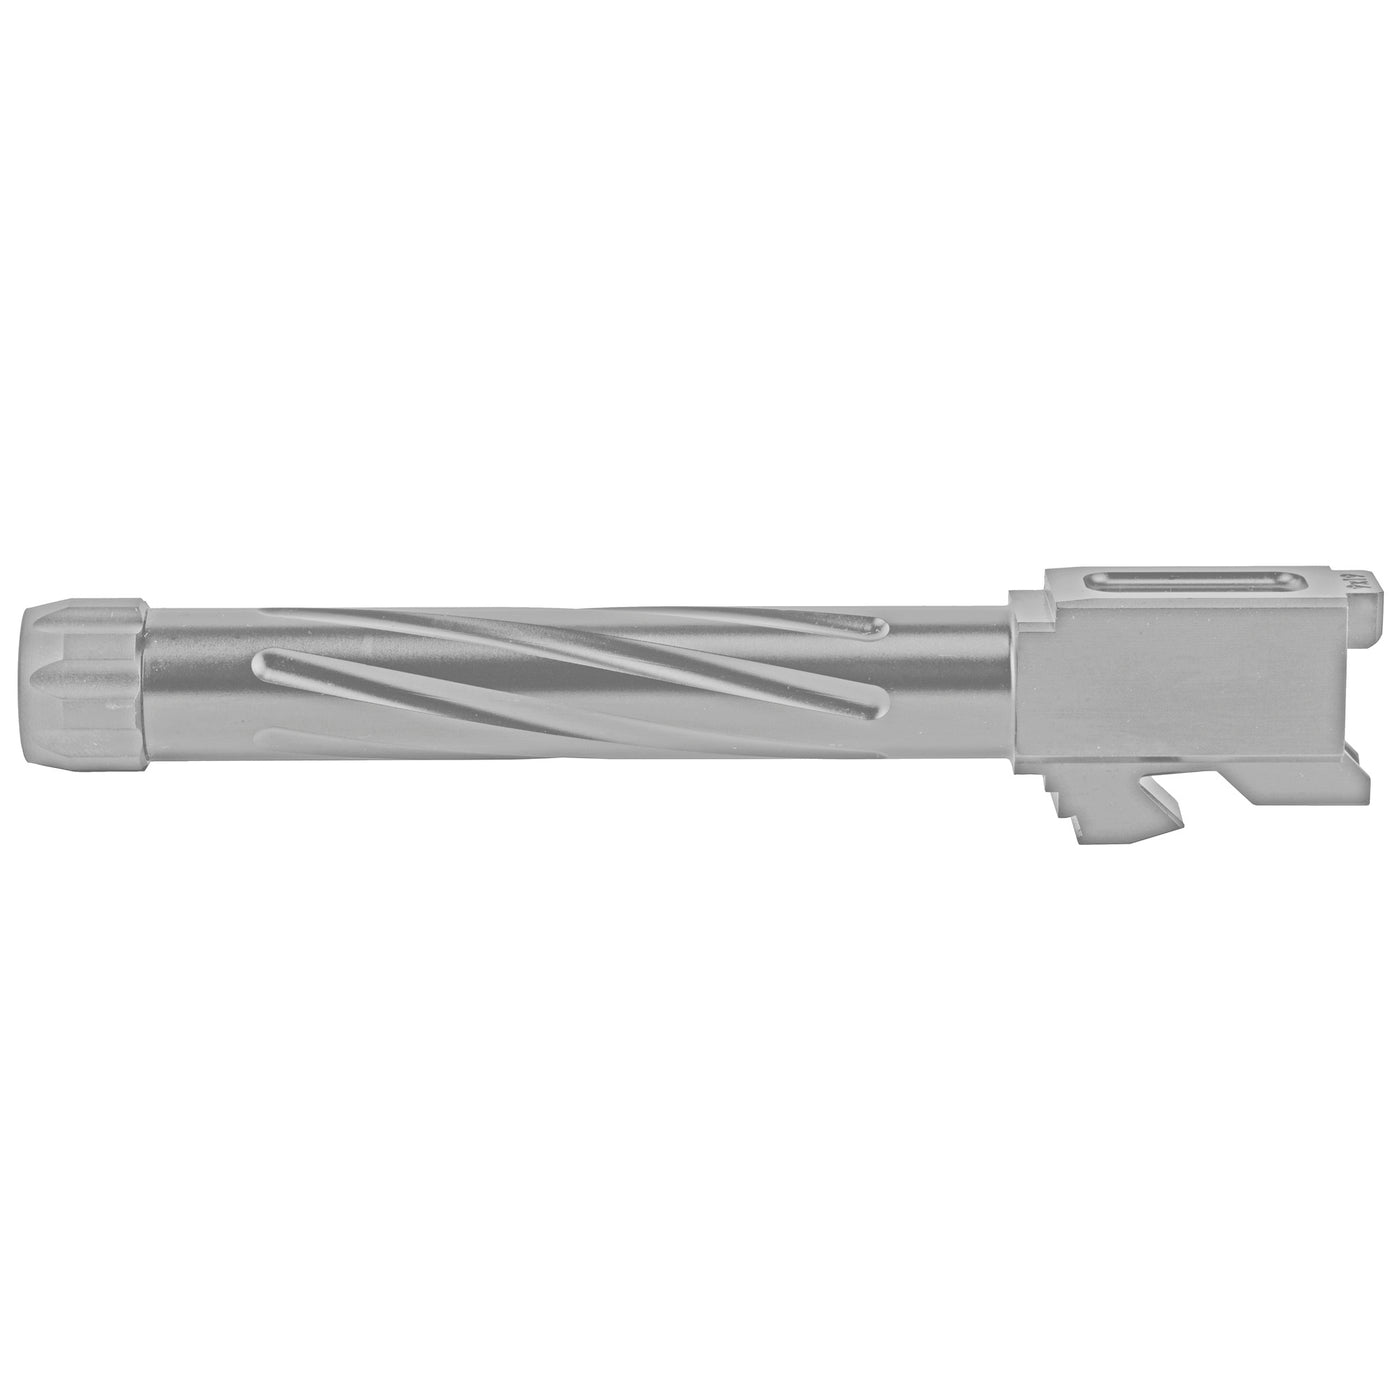 Rival Arms Barrel For Glock 17 - Gen 3/4 Threaded S/s